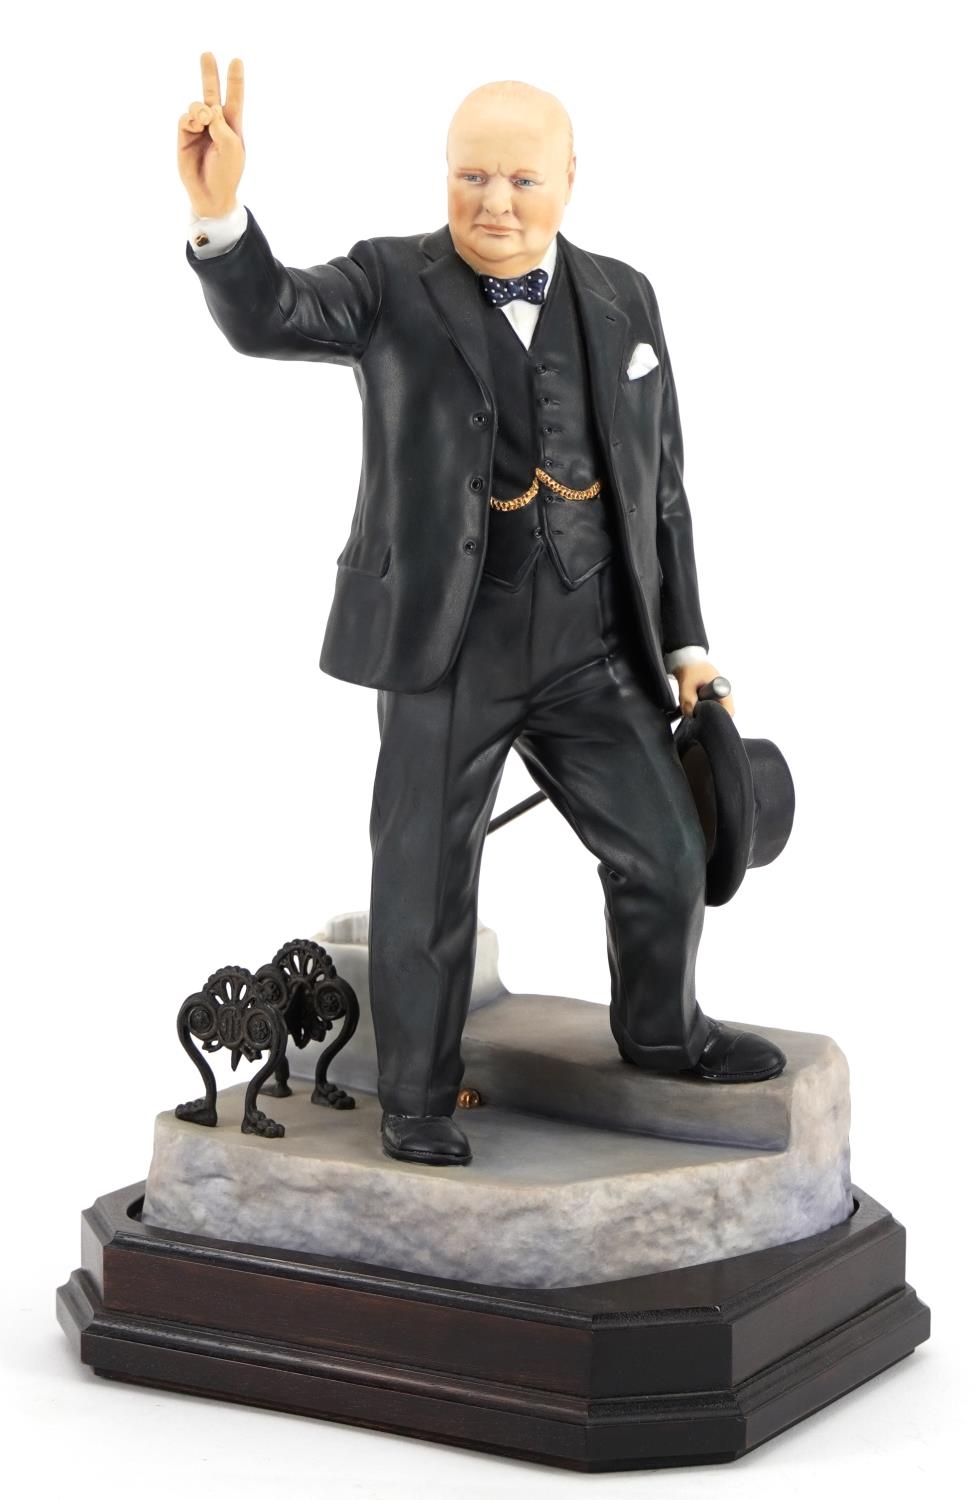 Ashmore for Worcester porcelain commemorative figure of Sir Winston Churchill raised on a wooden - Image 2 of 6